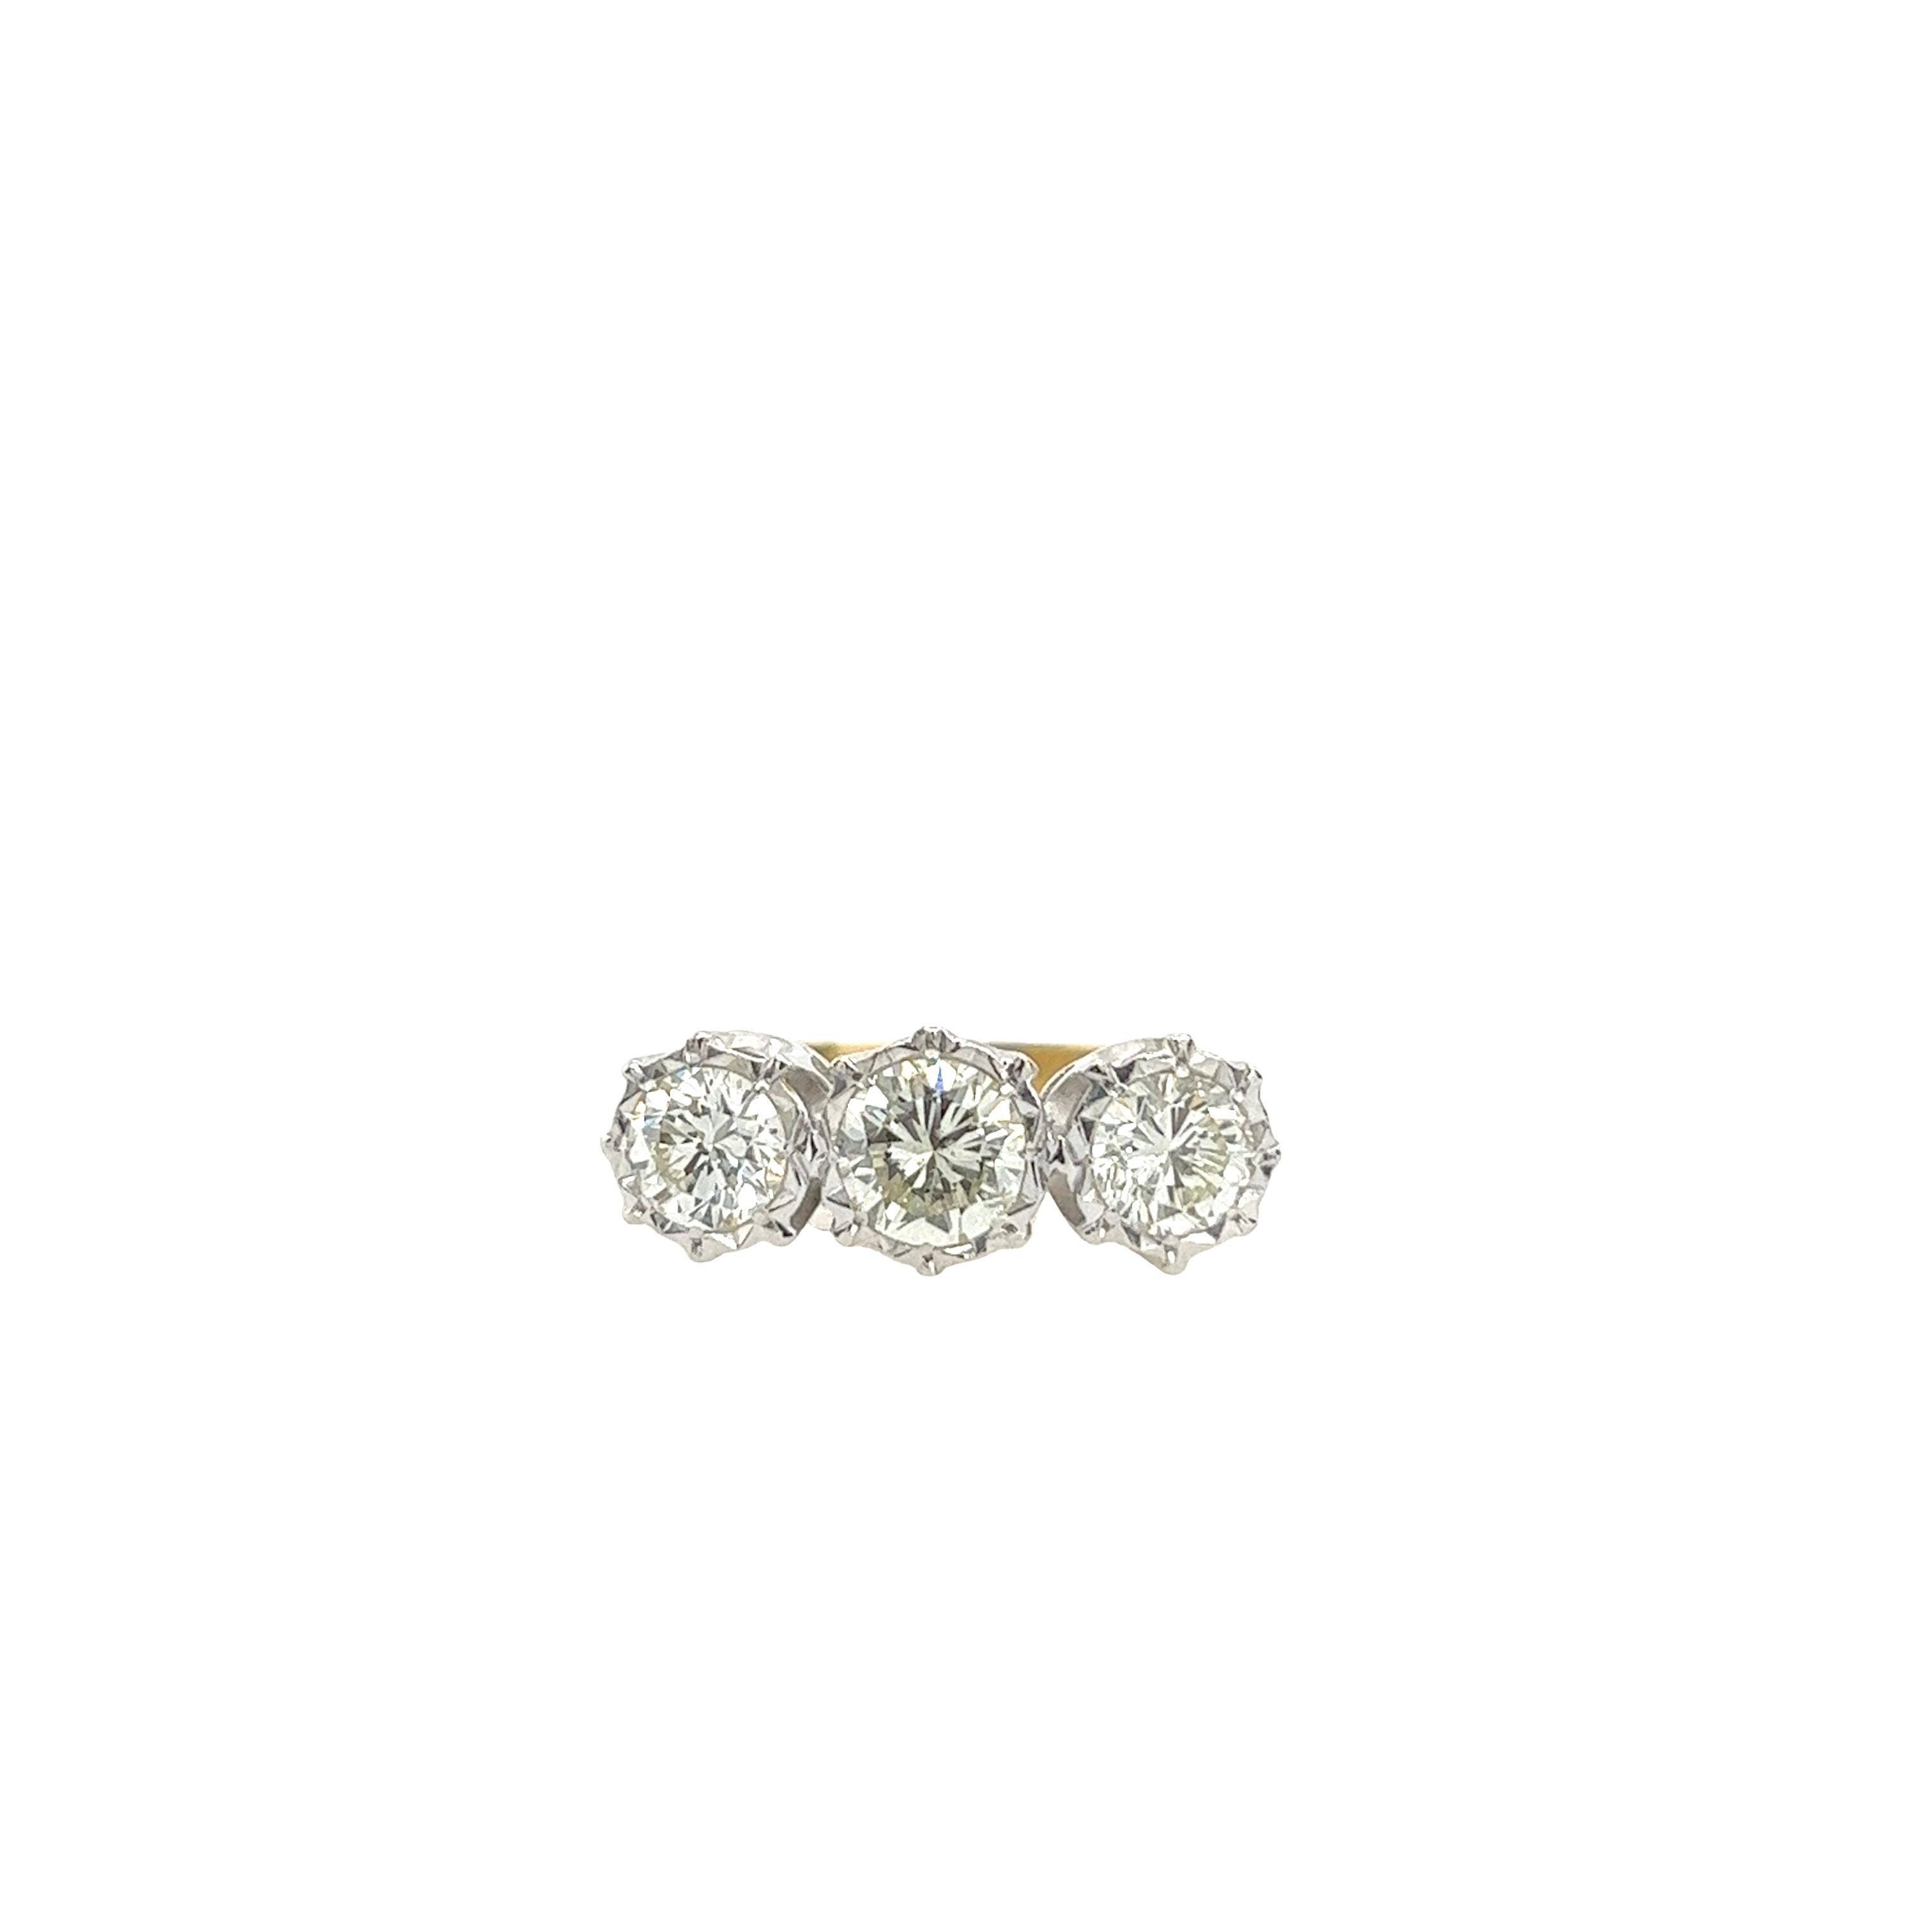 18ct Yellow & White Gold 3 Stone Diamond Ring, Set With 1.46ct Natural Diamonds For Sale 1